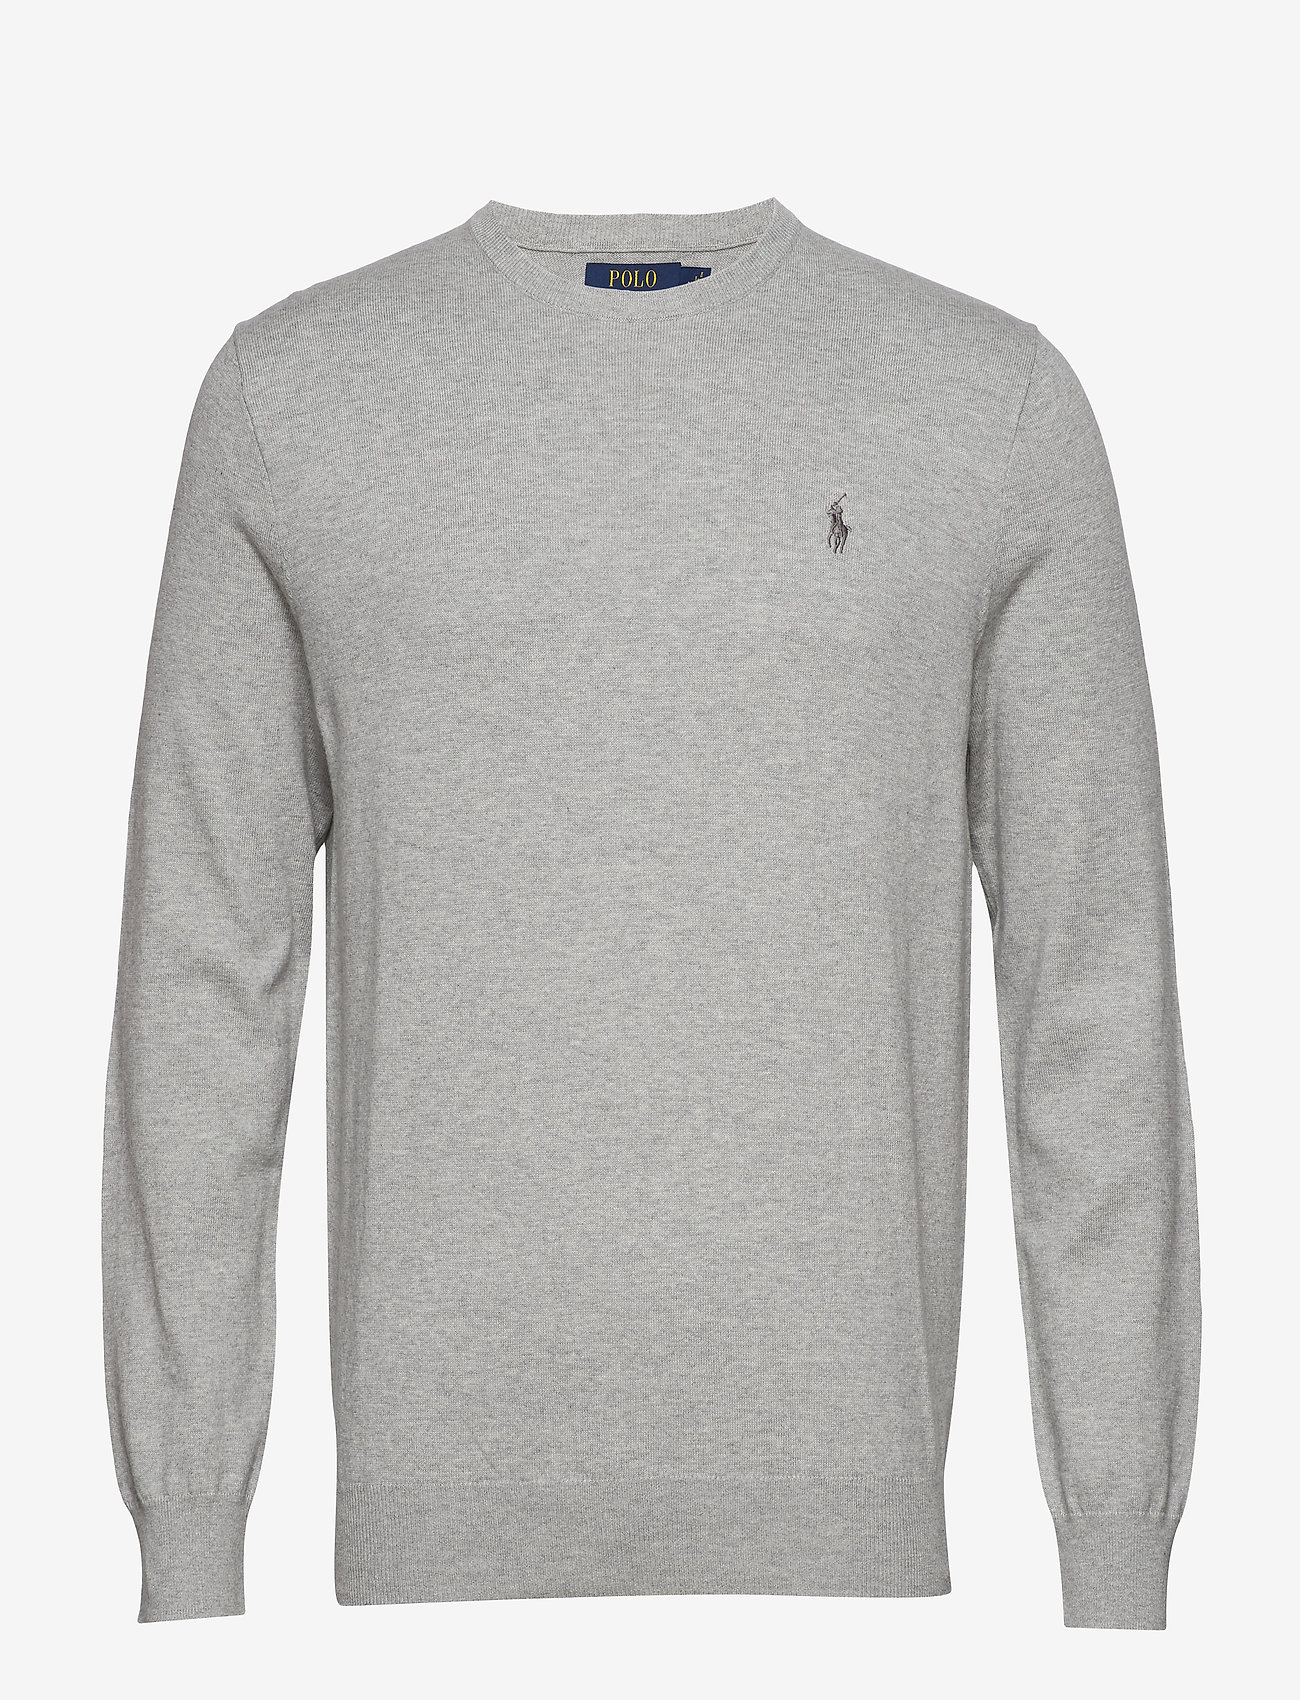 Polo Ralph Lauren - Slim Fit Cotton Sweater - pulls col rond - andover heather - 0